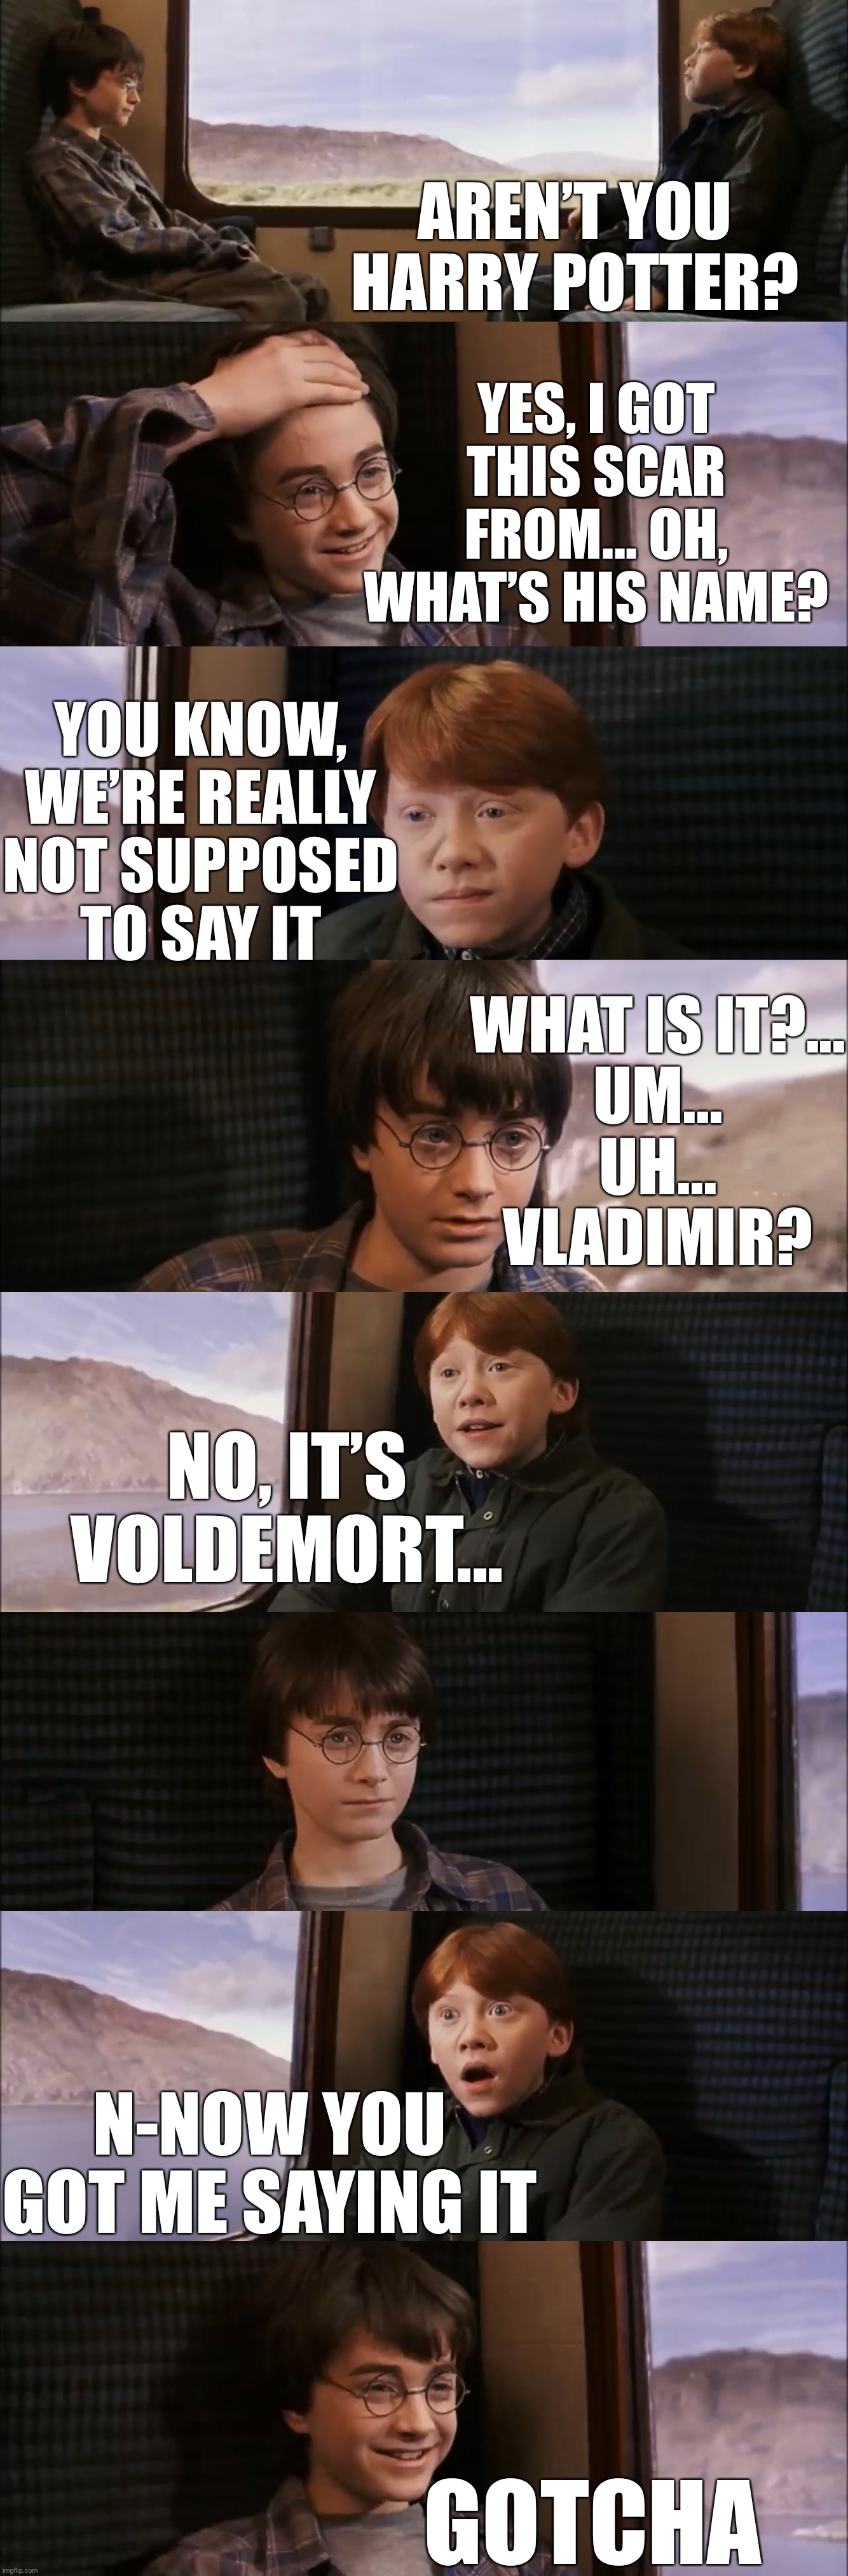 AREN’T YOU HARRY POTTER? YES, I GOT THIS SCAR FROM... OH, WHAT’S HIS NAME? YOU KNOW, WE’RE REALLY NOT SUPPOSED
TO SAY IT; WHAT IS IT?...
UM...
UH...
VLADIMIR? NO, IT’S VOLDEMORT... N-NOW YOU GOT ME SAYING IT; GOTCHA | image tagged in HarryPotterMemes | made w/ Imgflip meme maker